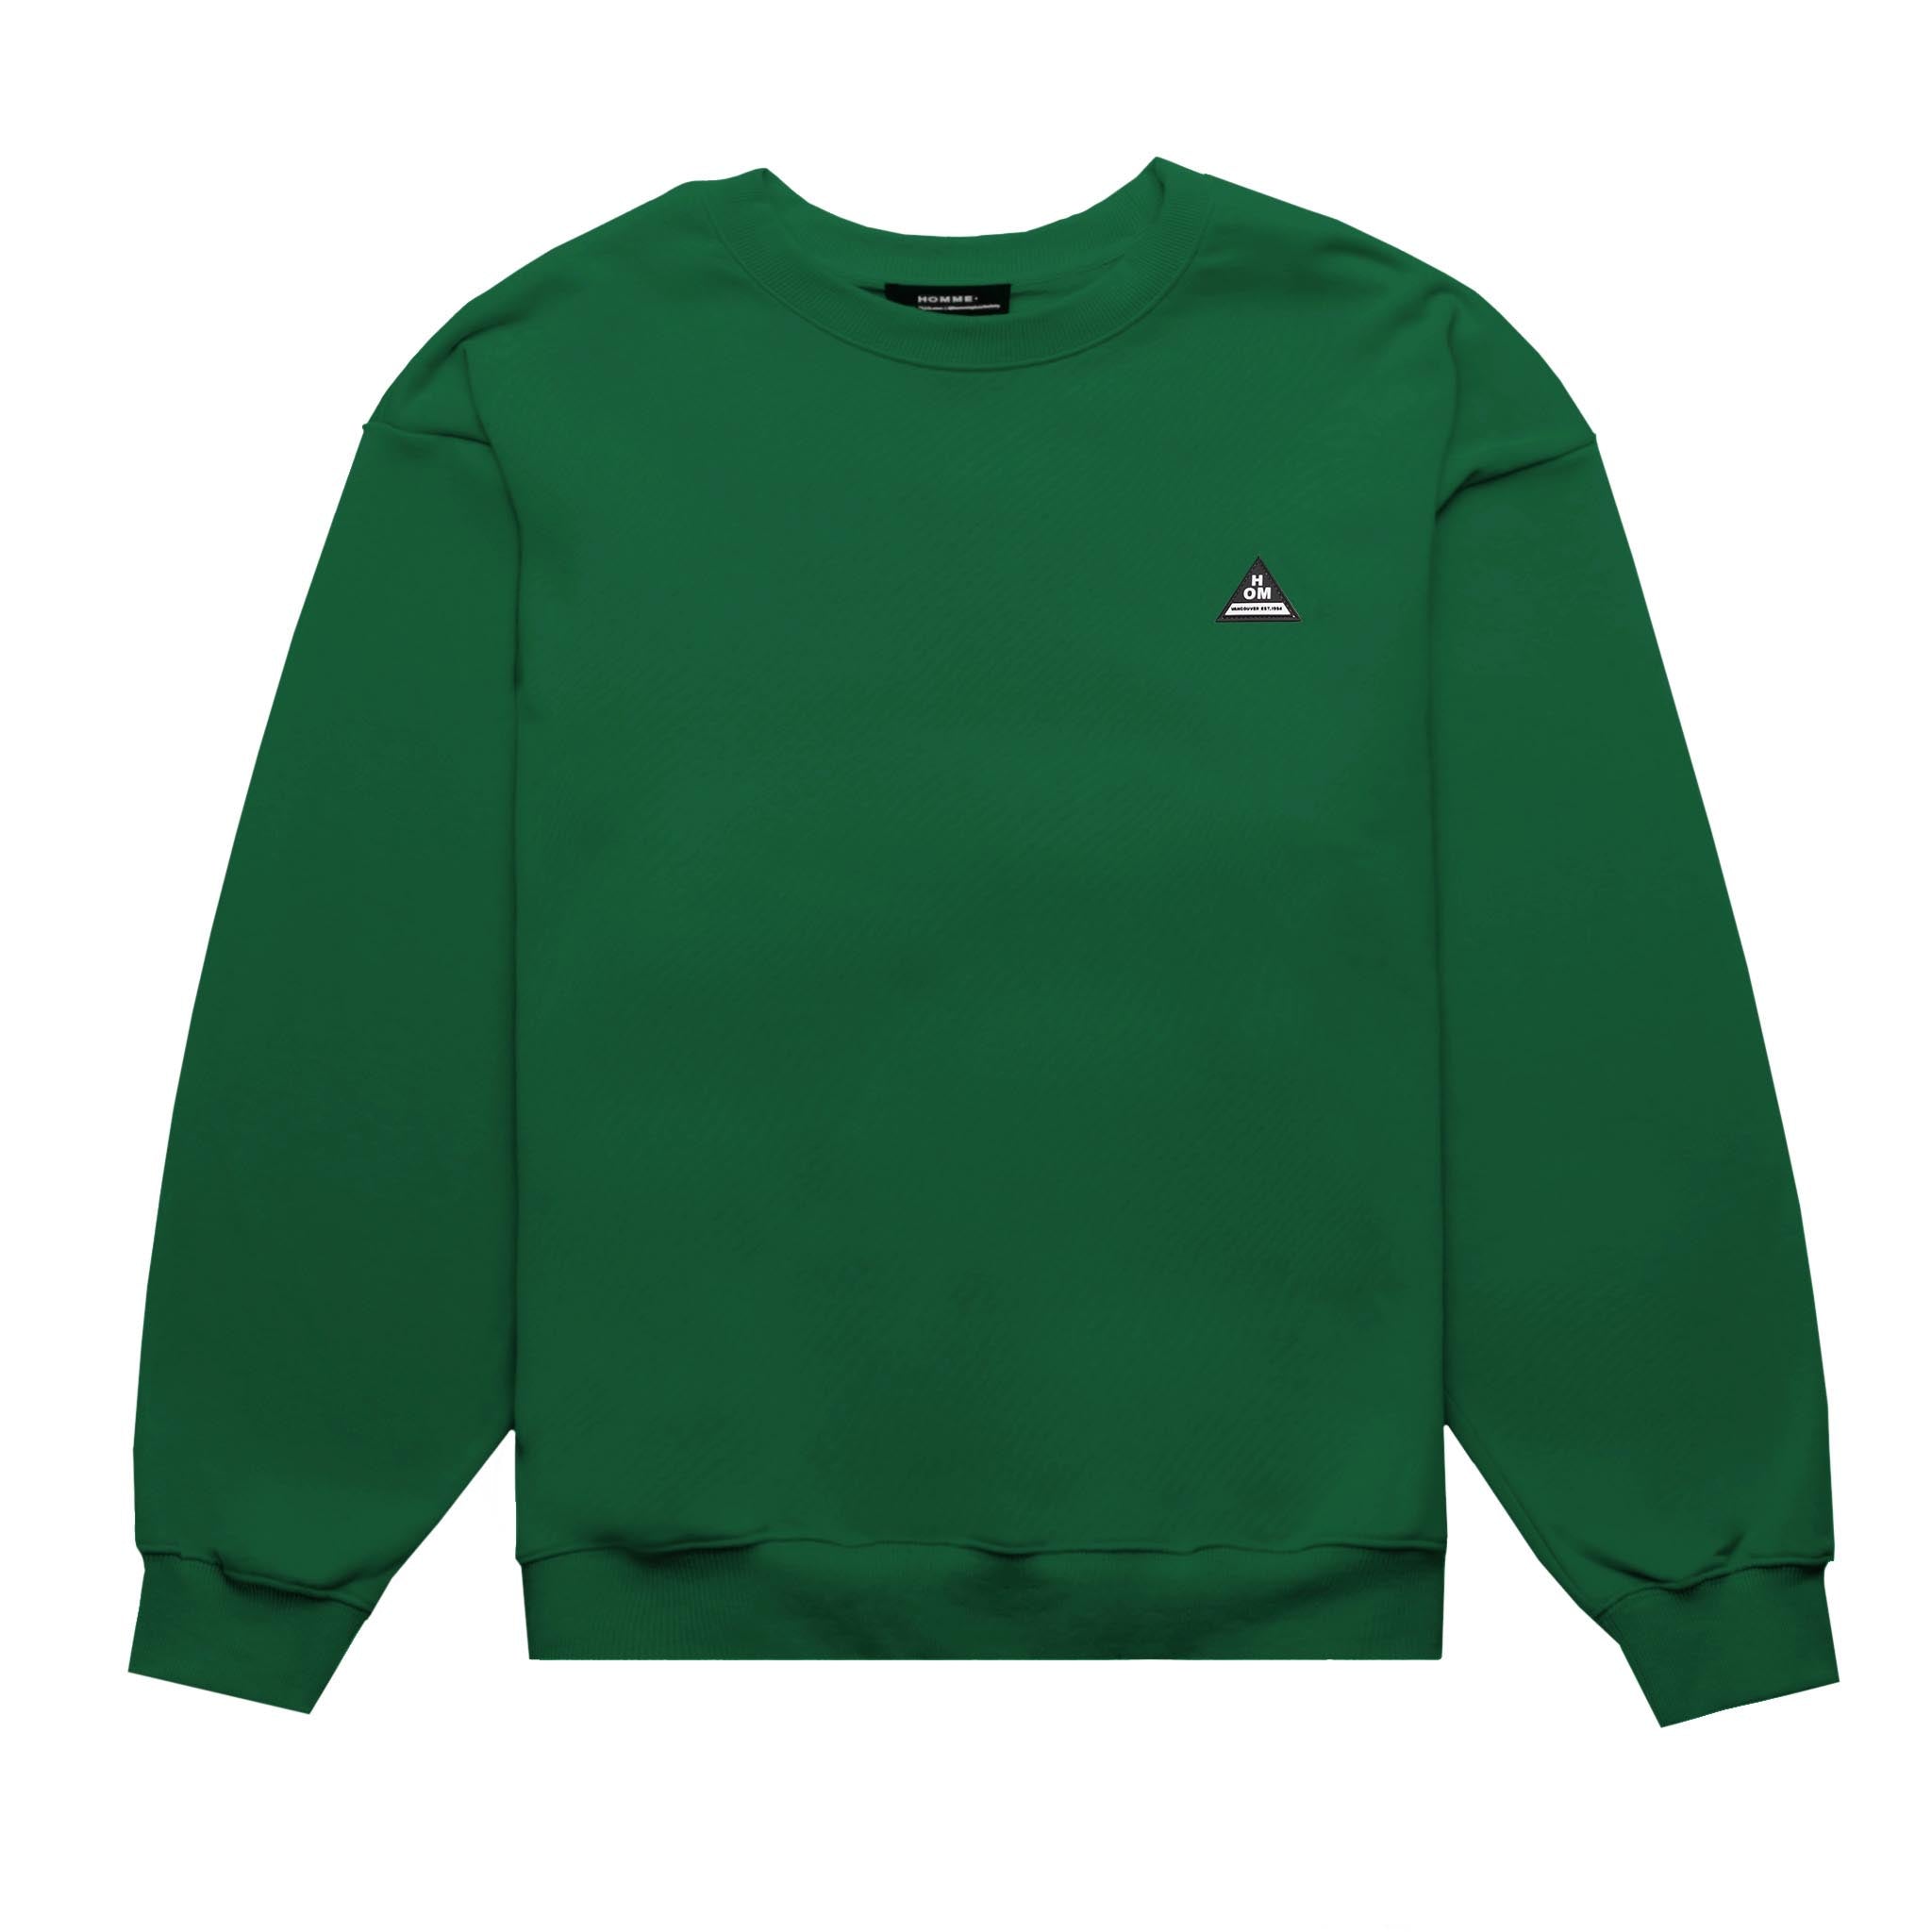 HOMME+ Triangle Patch Crewneck Hunter Green